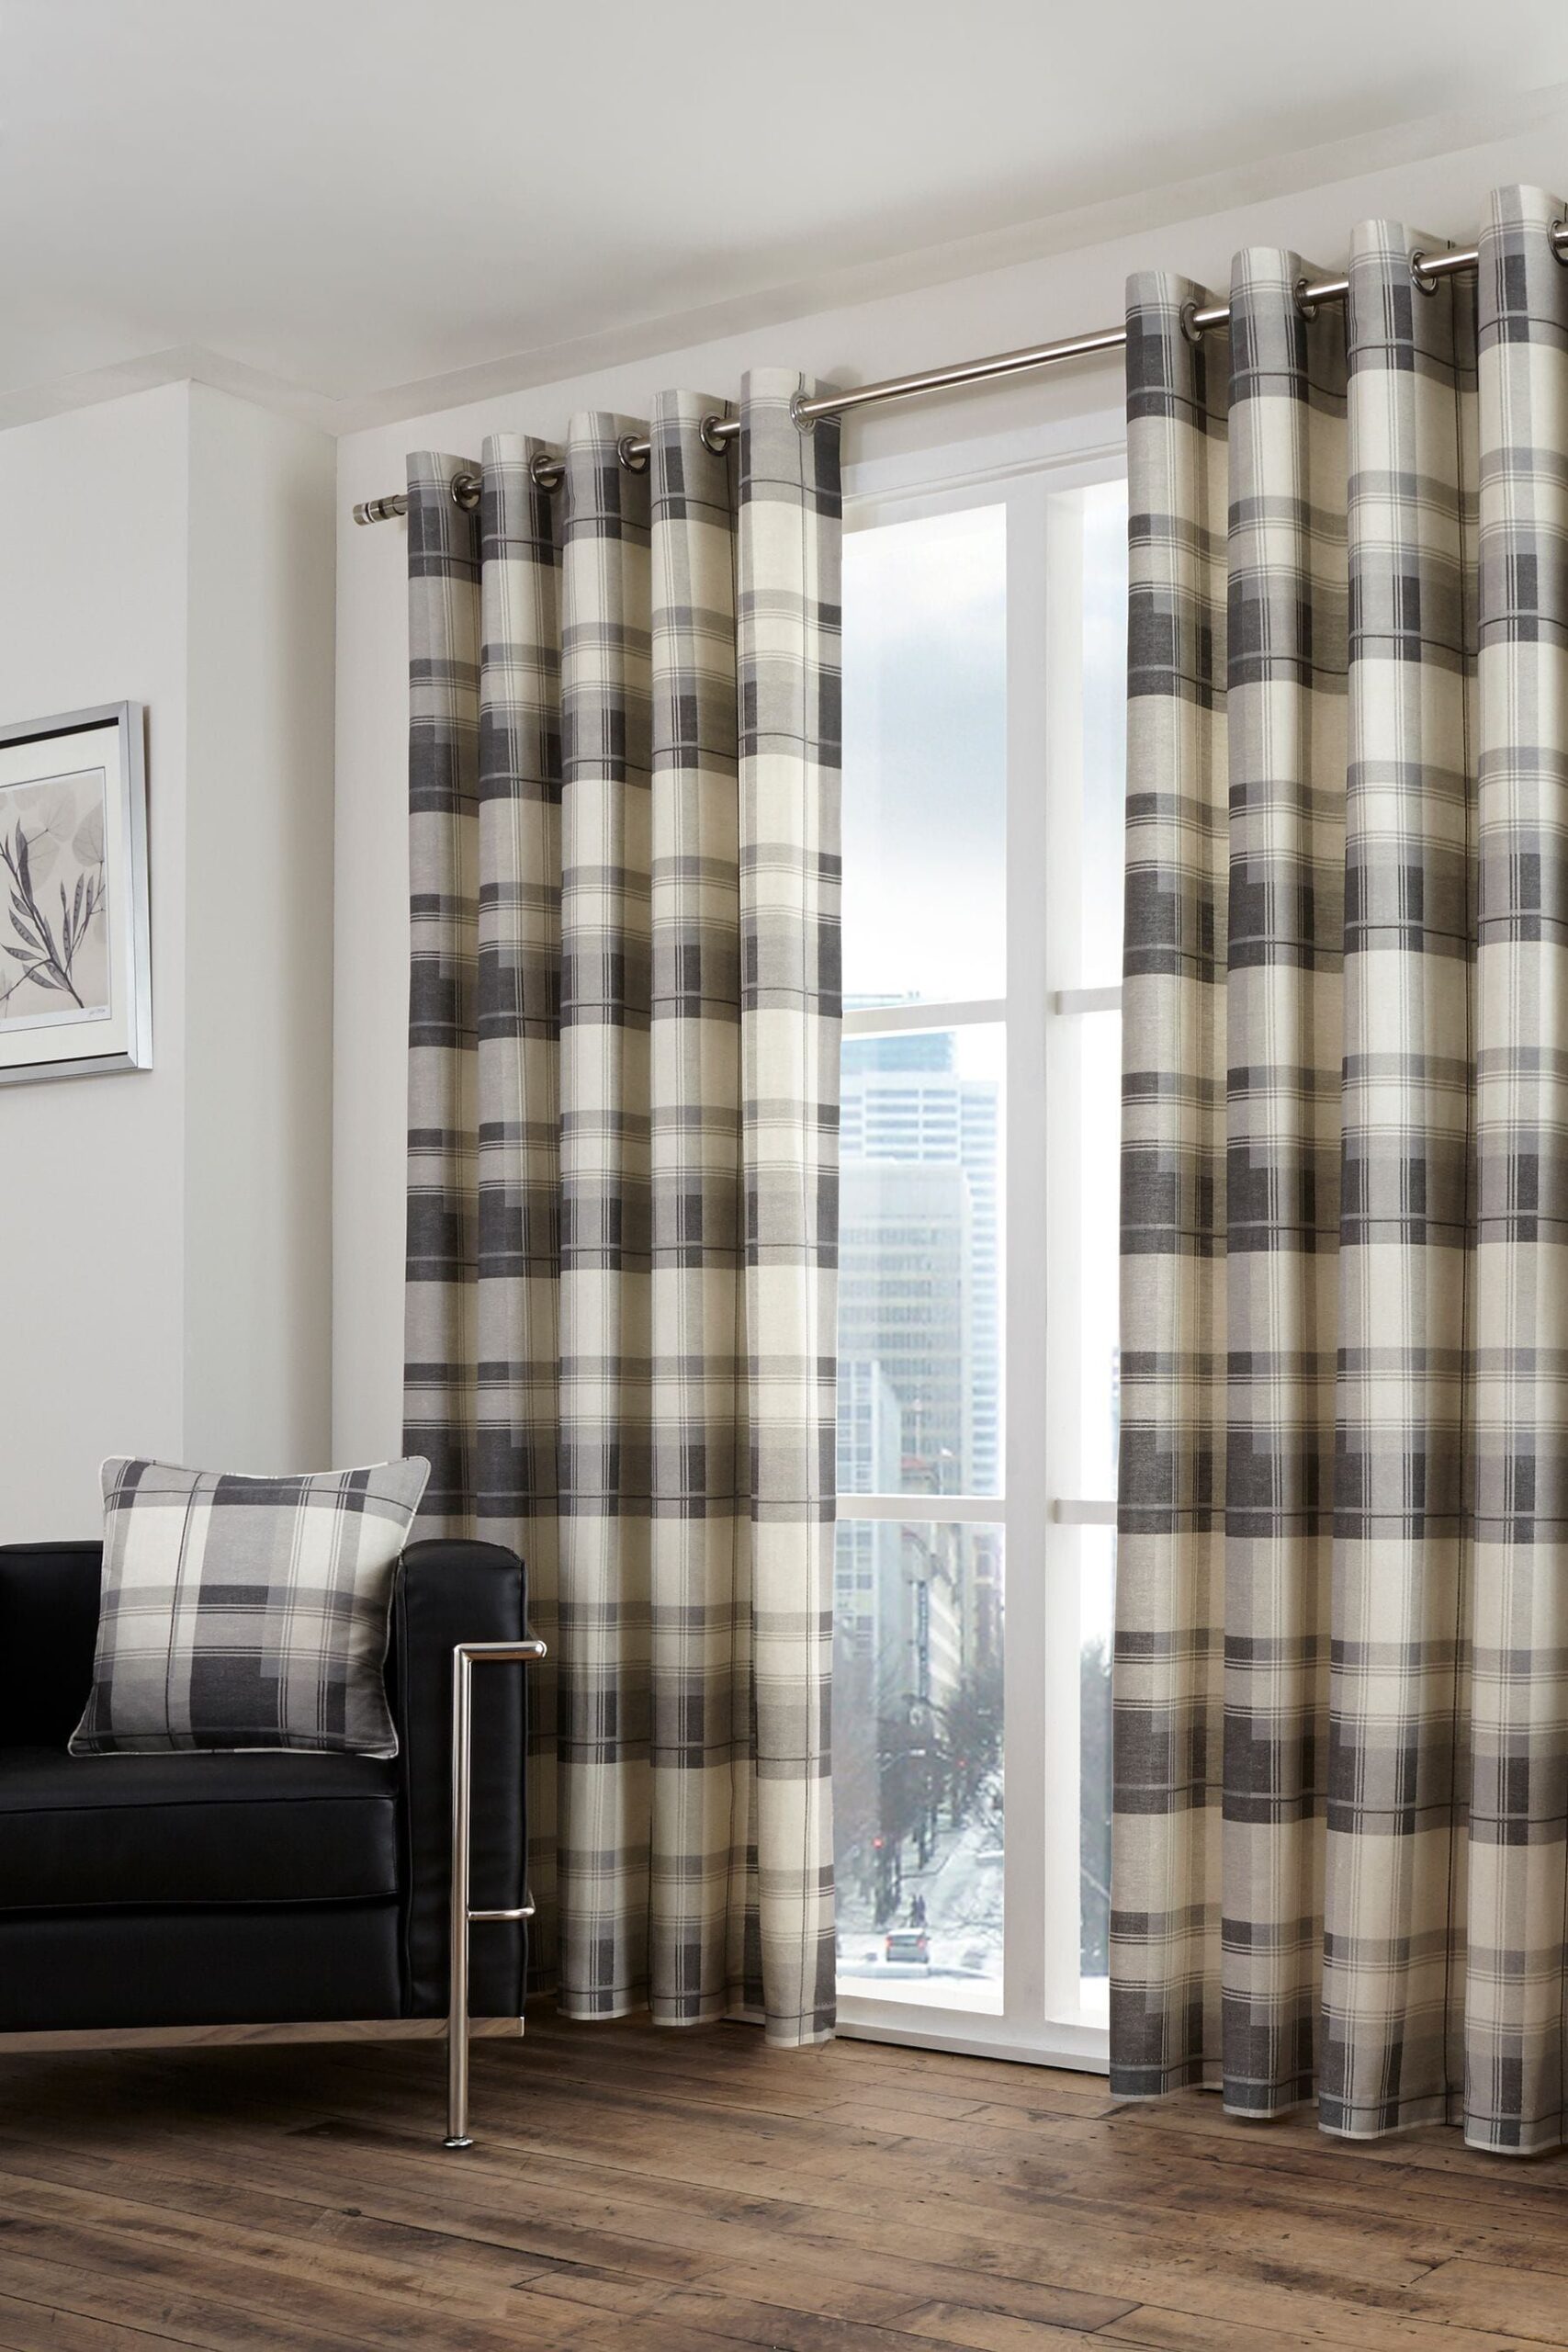 Eyelet Curtains: Add a Touch of Elegance to Your Windows with Eyelet Curtains